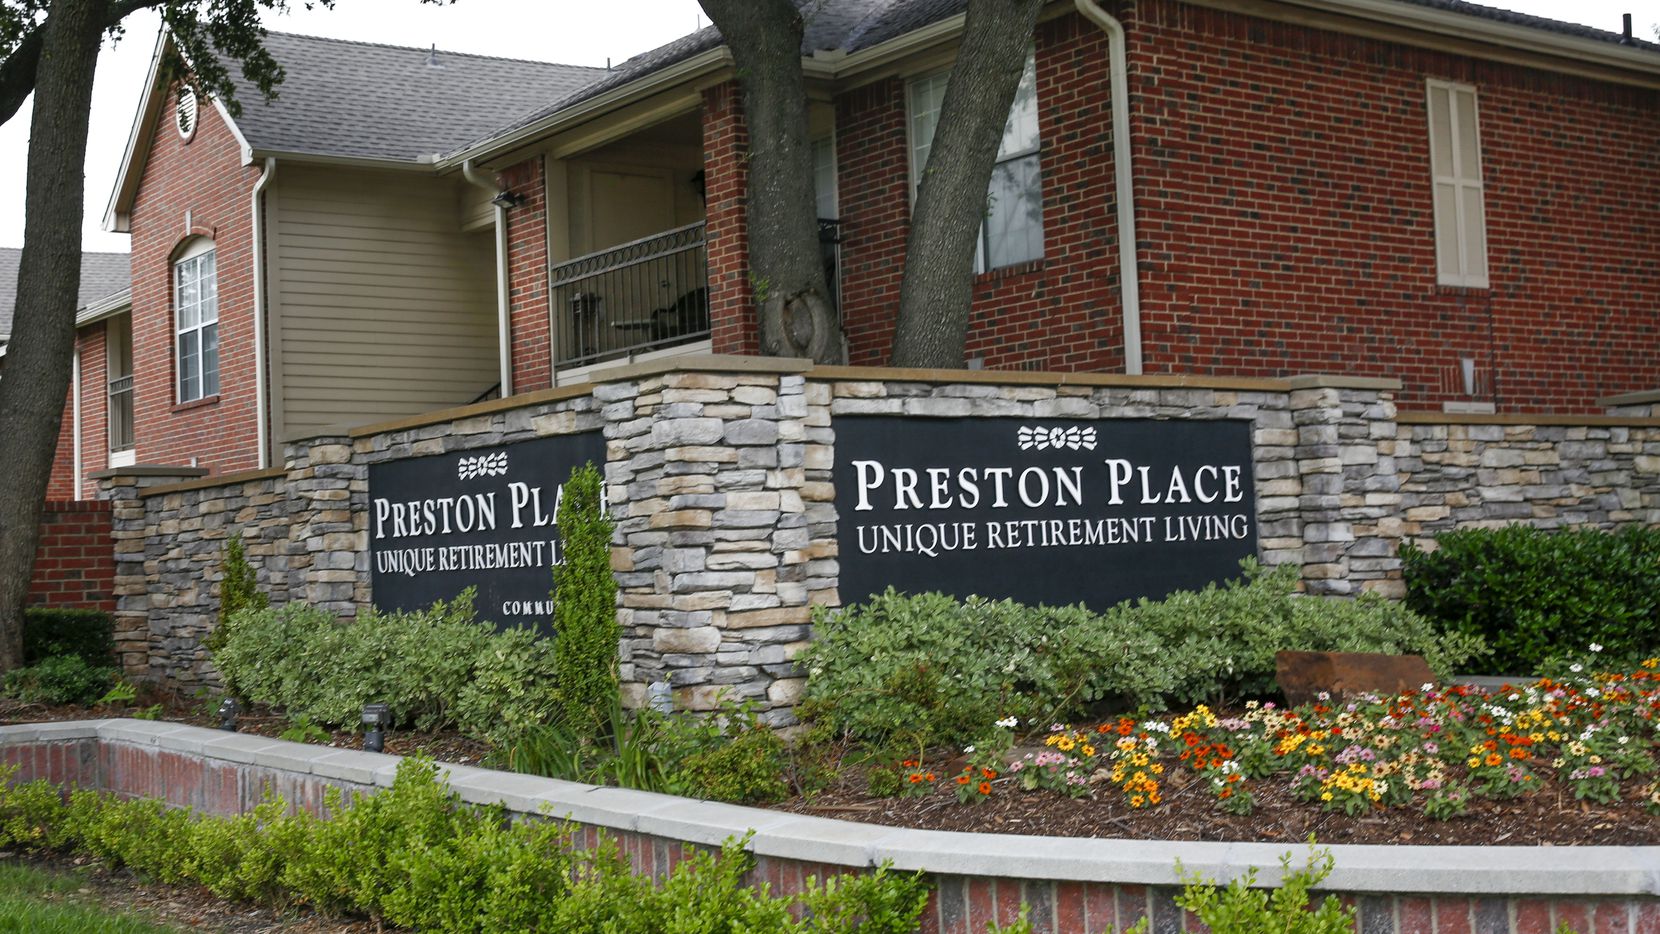 Preston Place Retirement Community located in Plano, Texas on Wednesday, June 5, 2019. One of the communities where Billy Chemirmir, accused serial killer, allegedly targeted elderly women. (Brian Elledge/The Dallas Morning News)